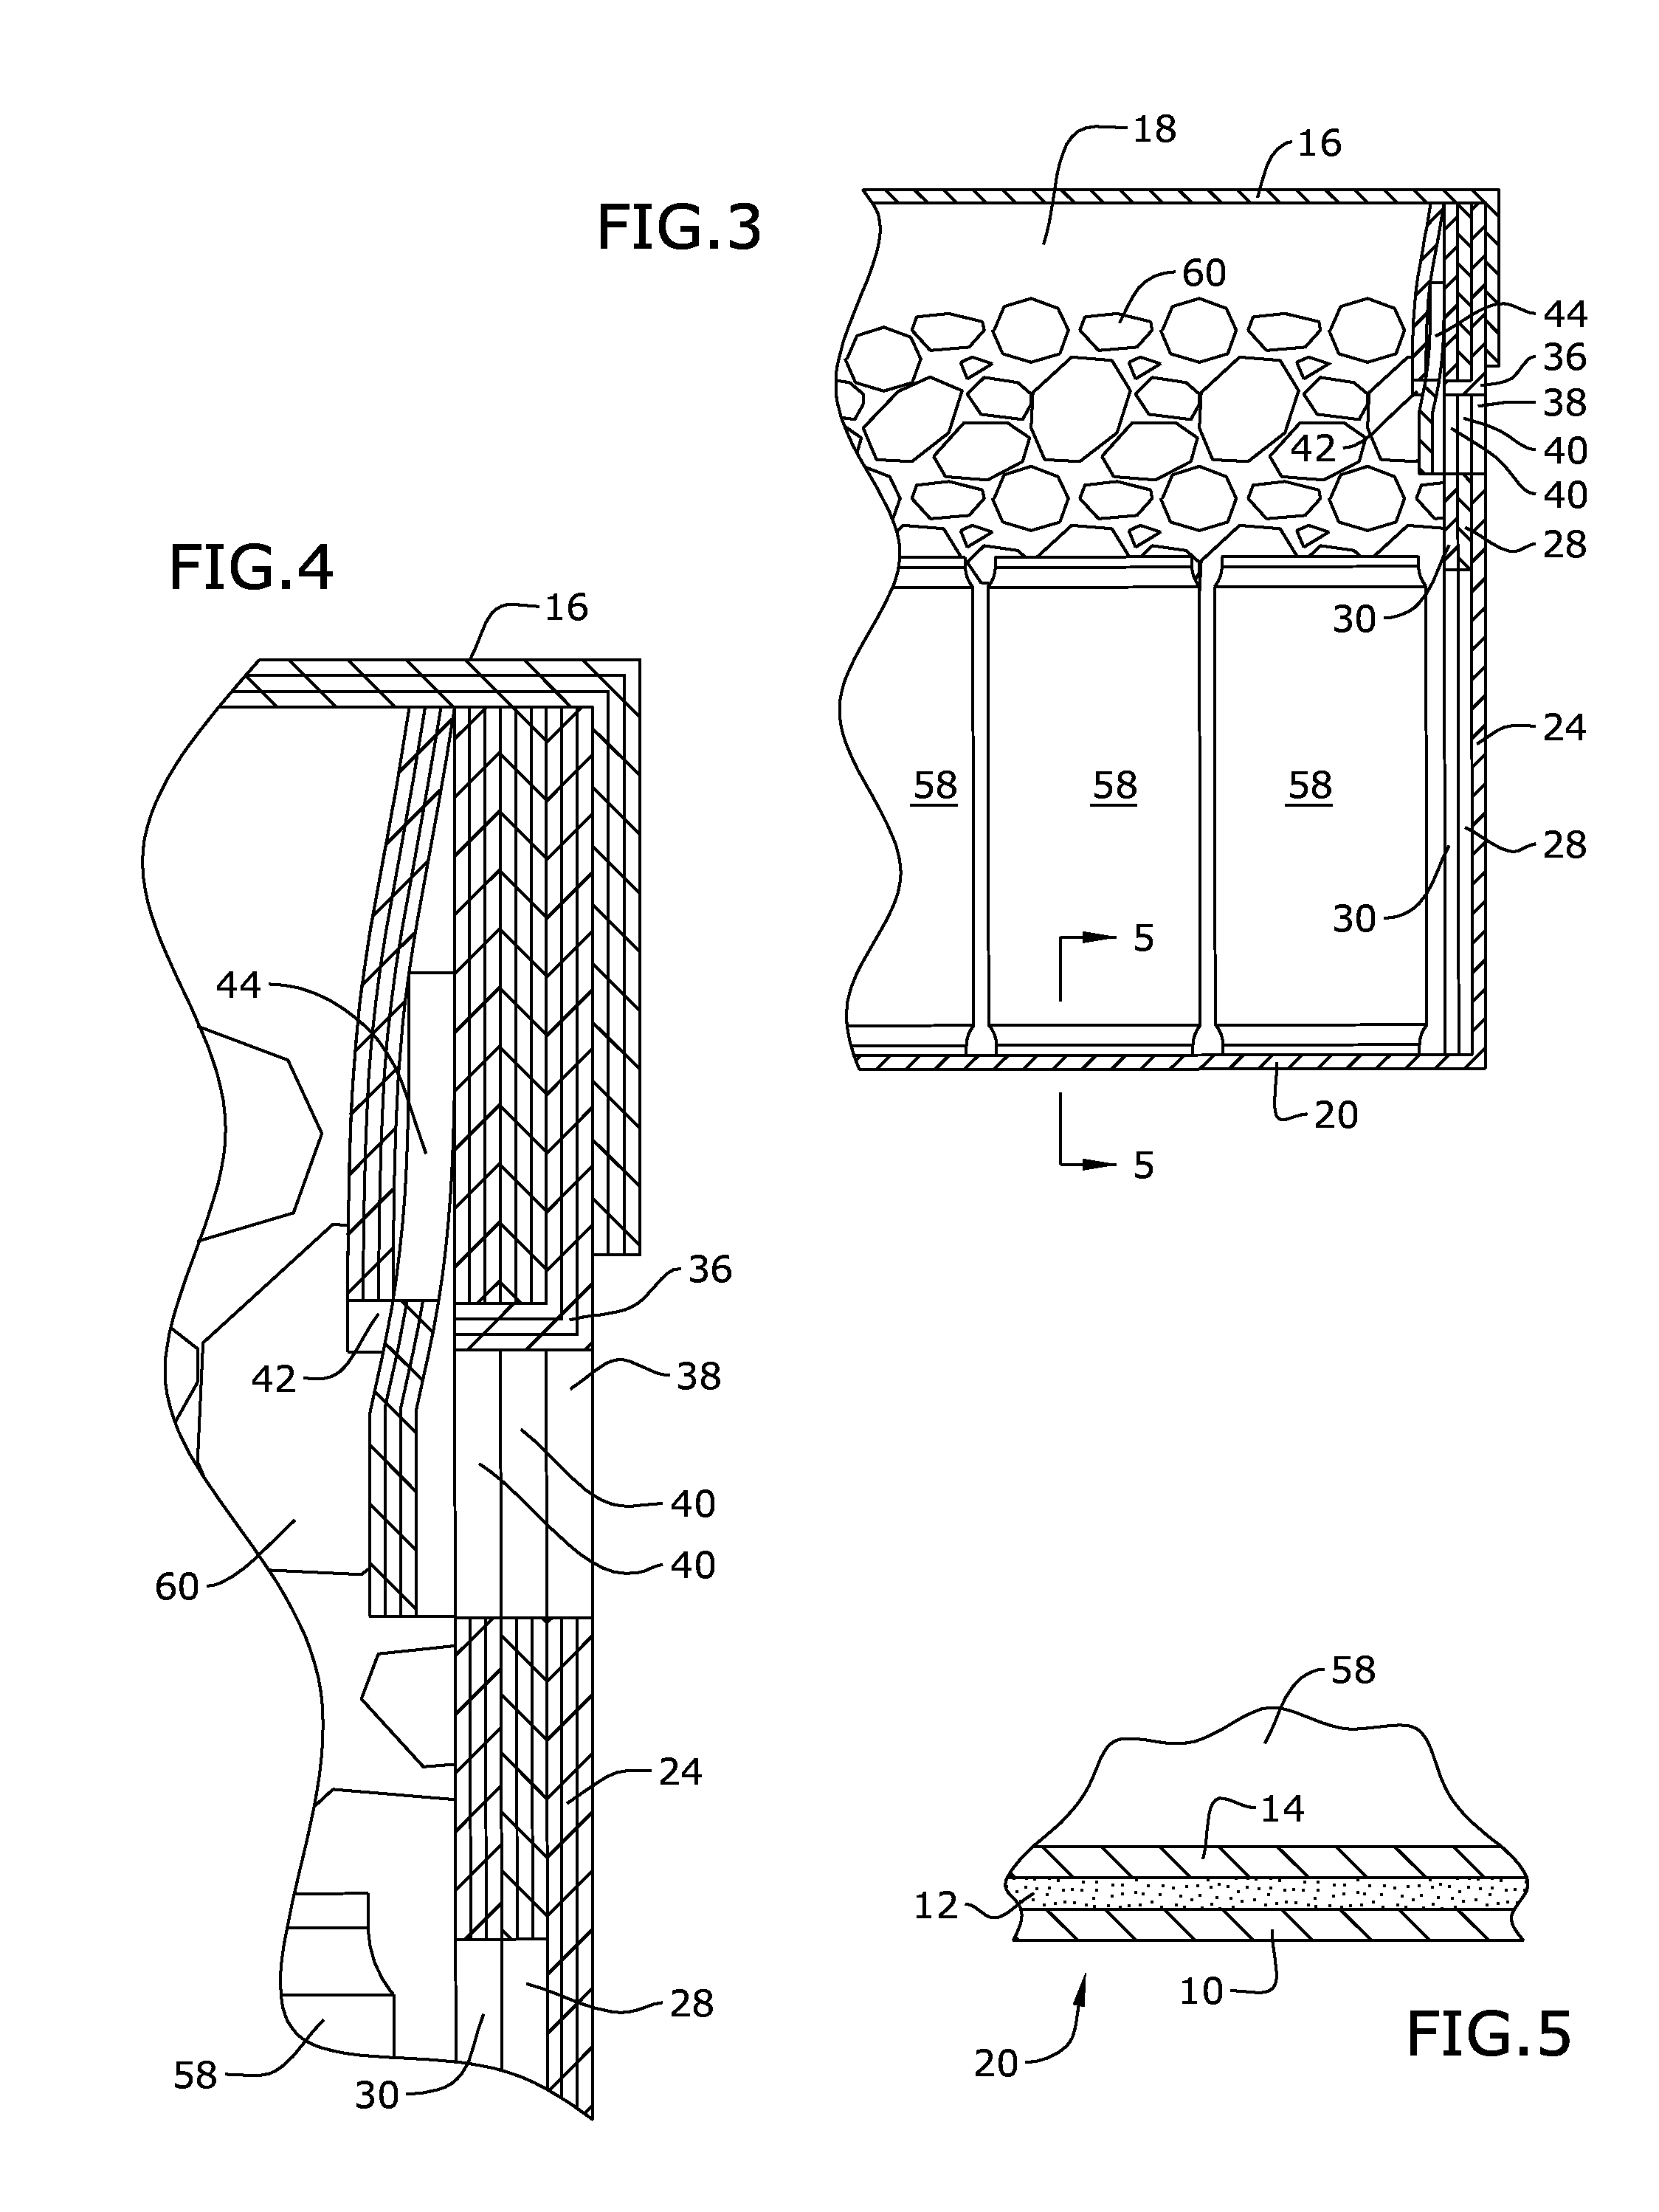 Paper-based thermal insulated container and method of manufacturing the same